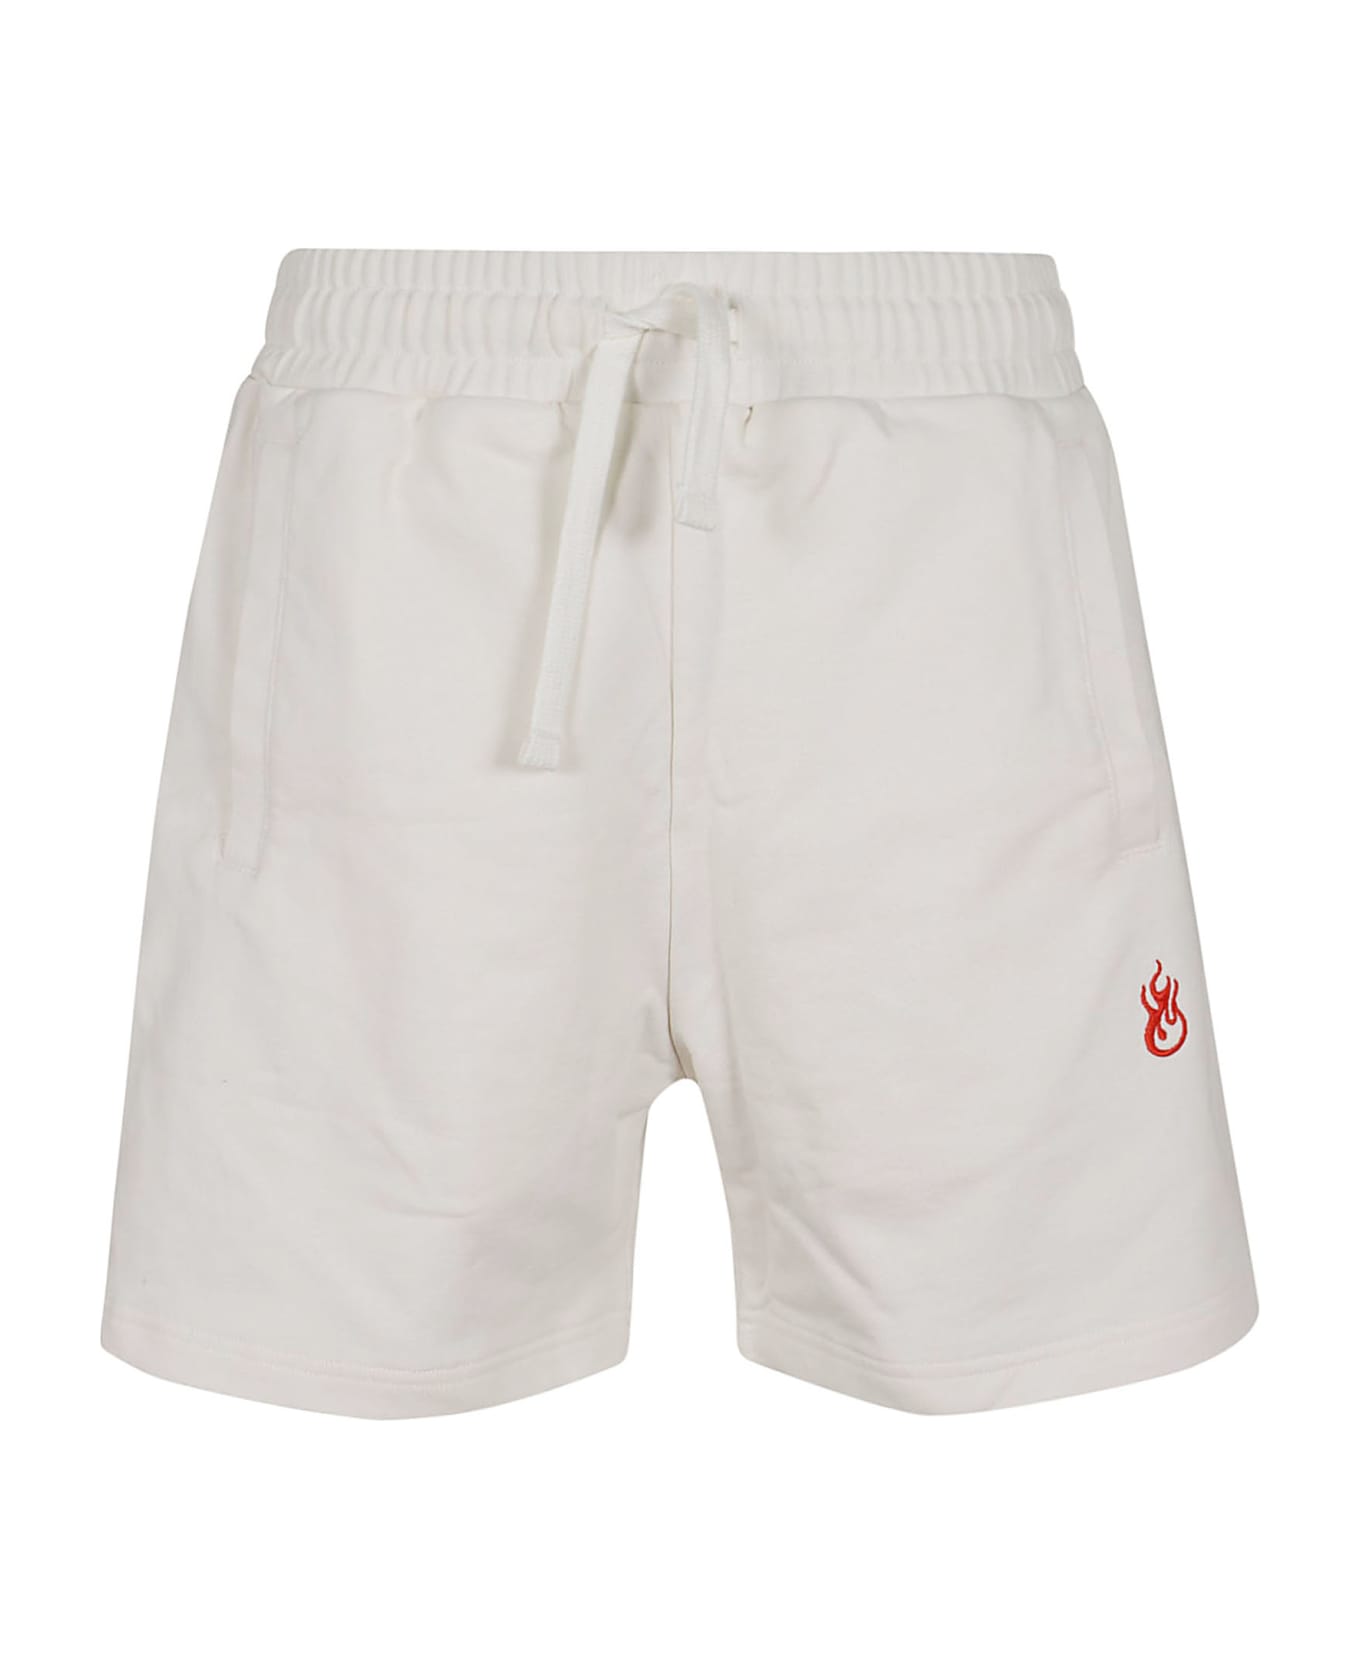 Vision of Super White Shorts With Flames Logo And Metal Label - White